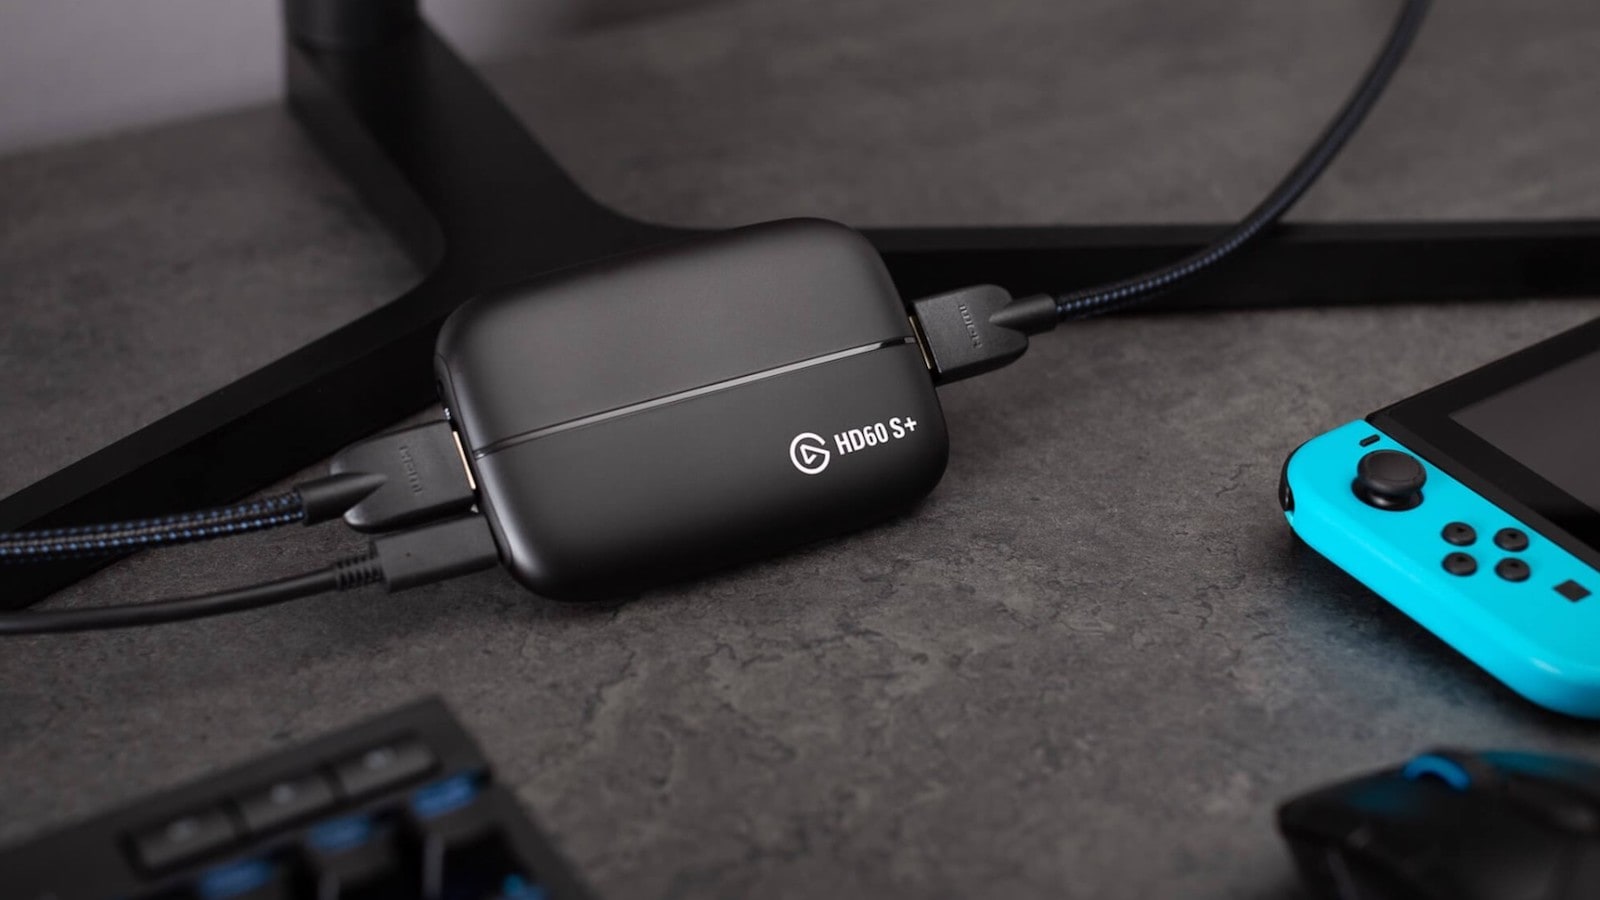 Elgato HD60 S+ external capture card offers 4K60 HDR 10